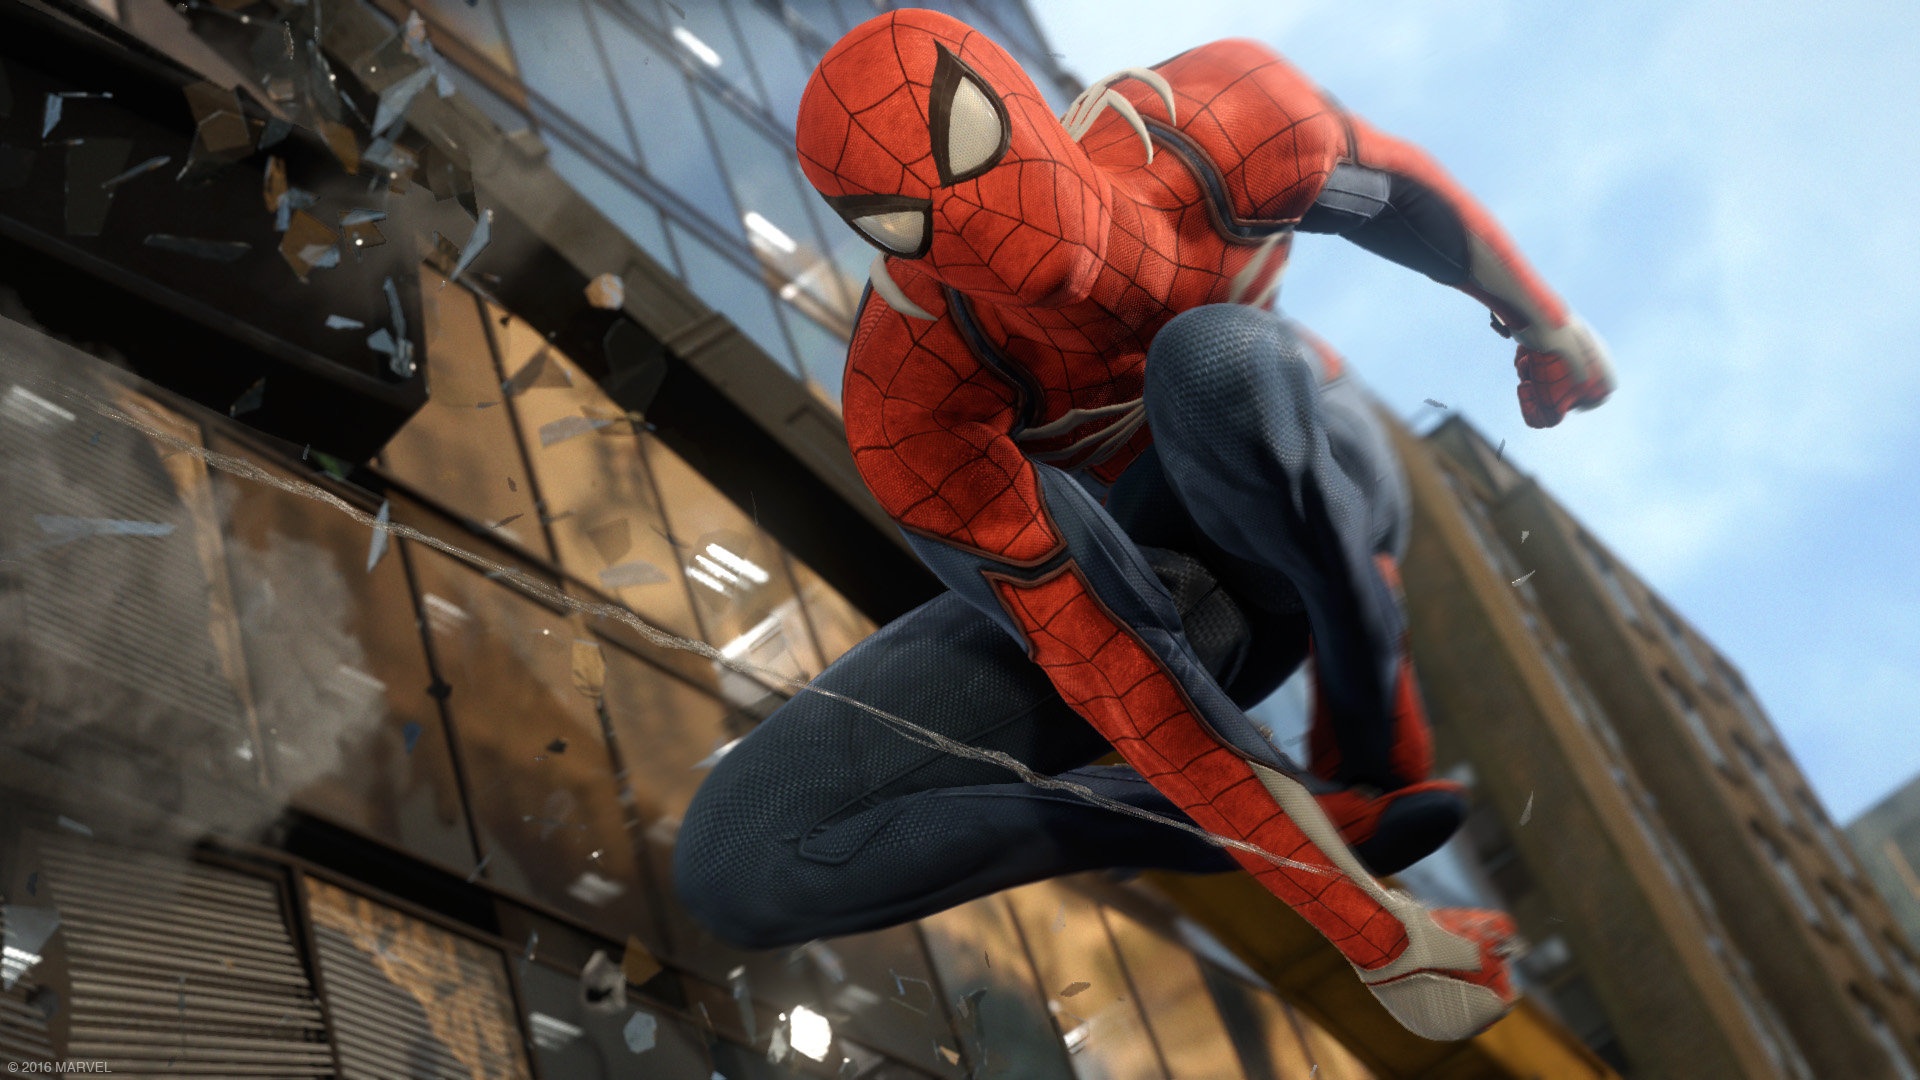 Marvel's SpiderMan, Spider-Man swinging through the air past city buildings- Best Ps4 Pro games